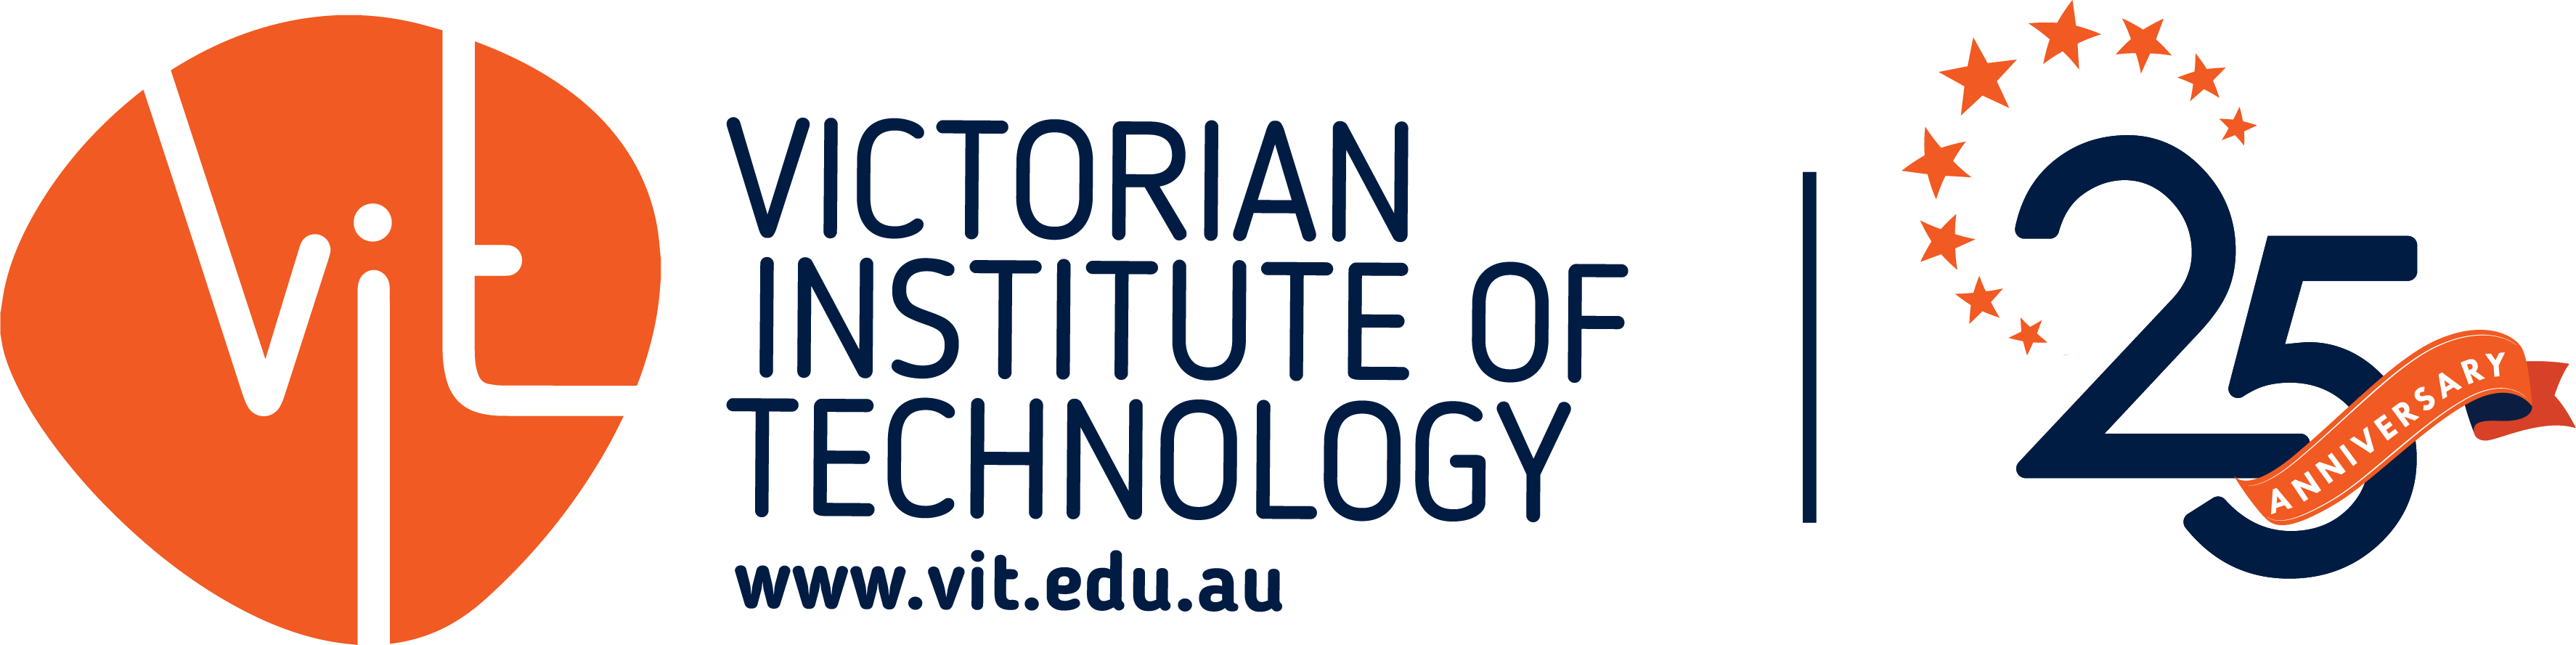 Victorian Institute of Technology  image